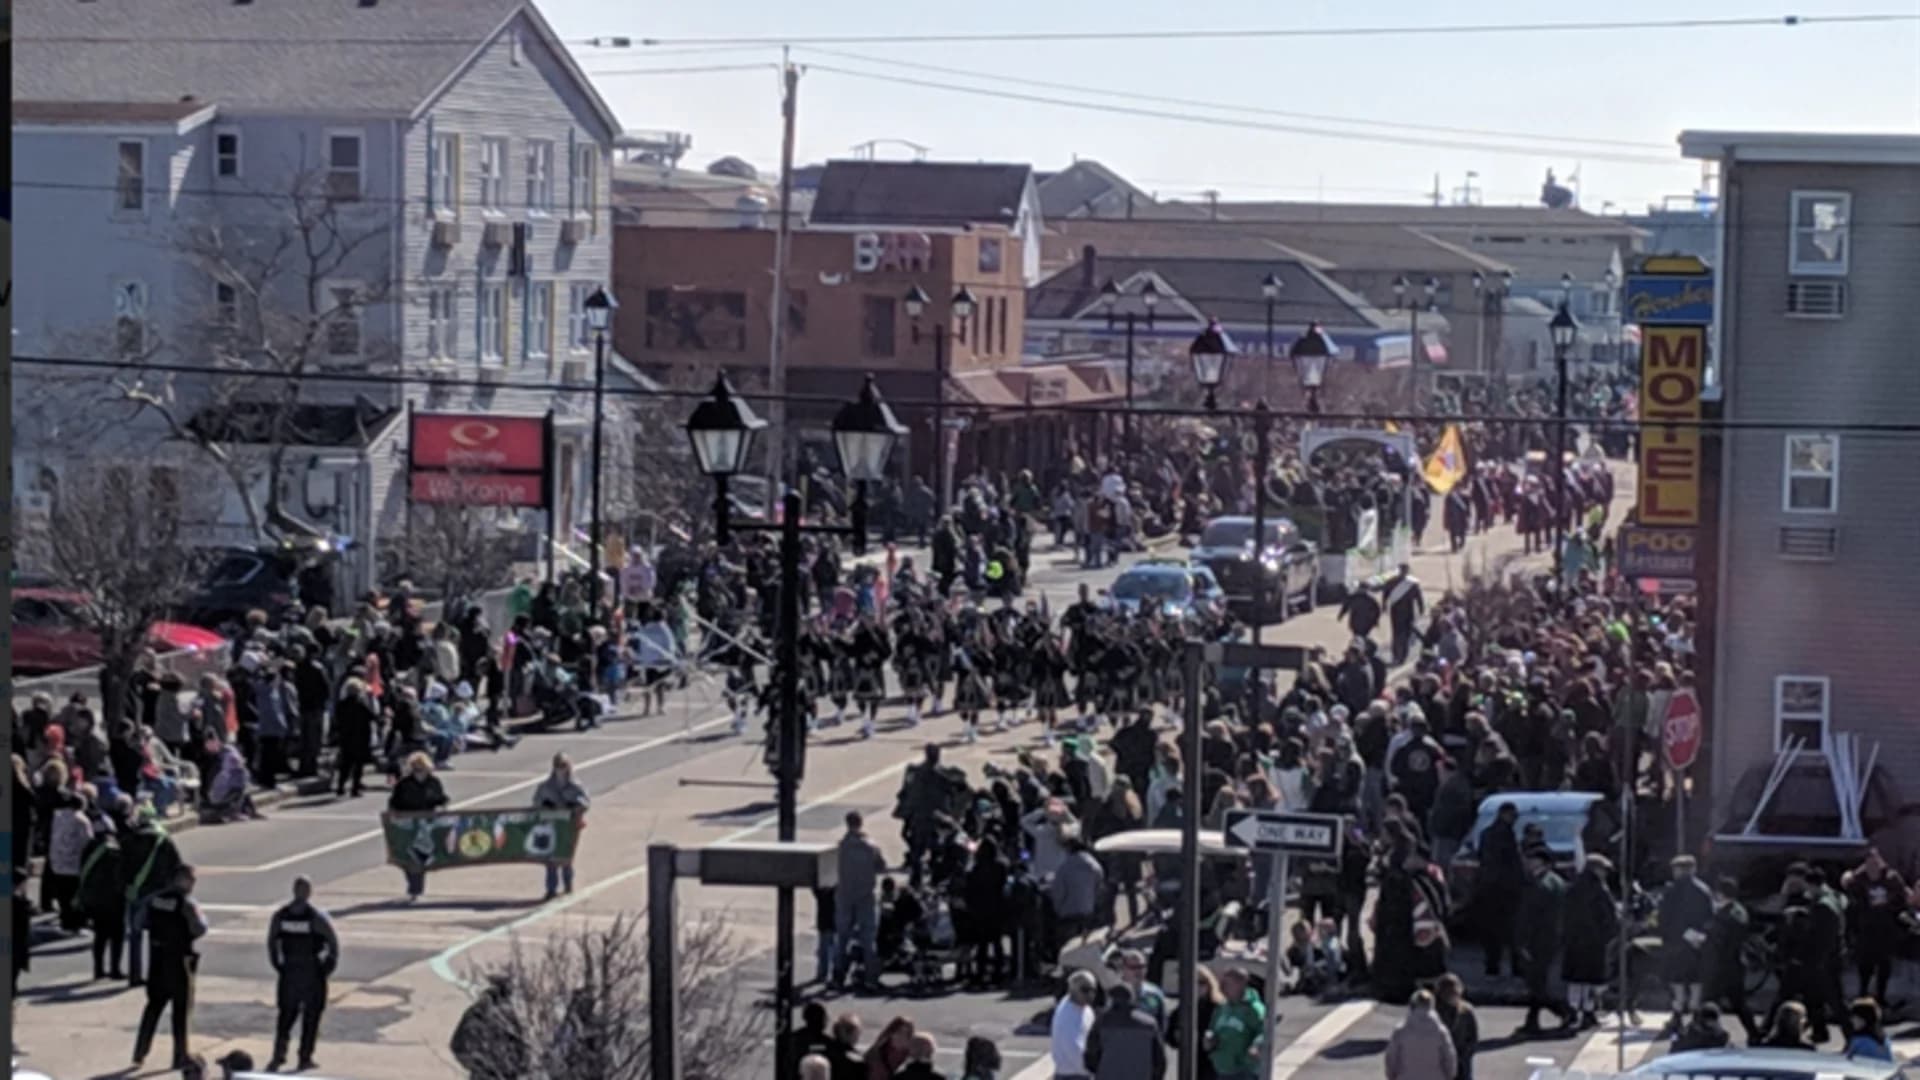 Your 2019 New Jersey St. Patrick's Day Photos